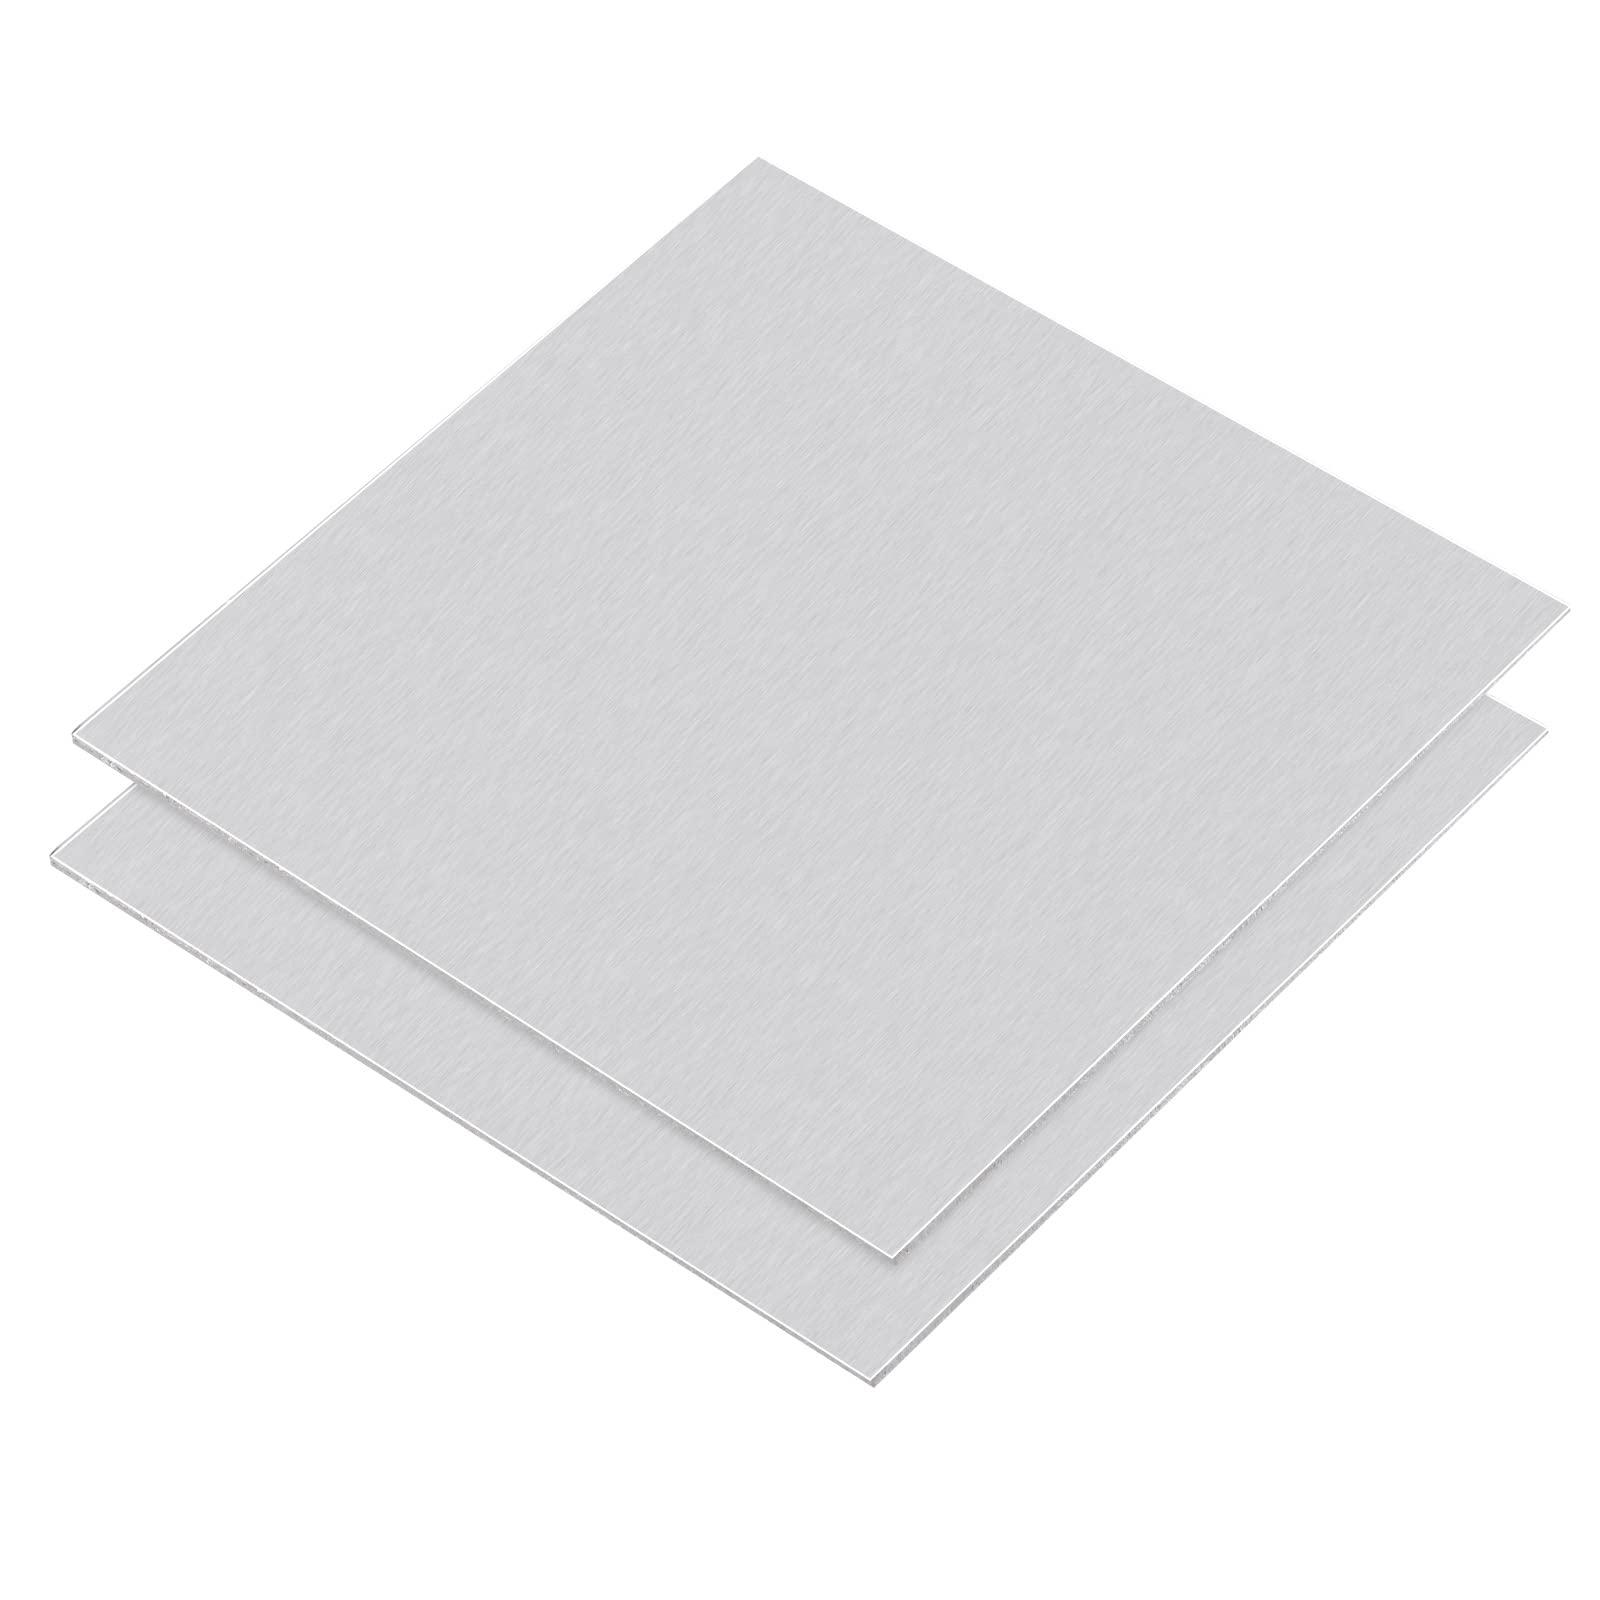 sourcing map 1060 Aluminum Sheet, 300mm x 300mm Rectangle Aluminum Plate 1mm Thick Flat Metal Stock with Protective Film, 2Pcs